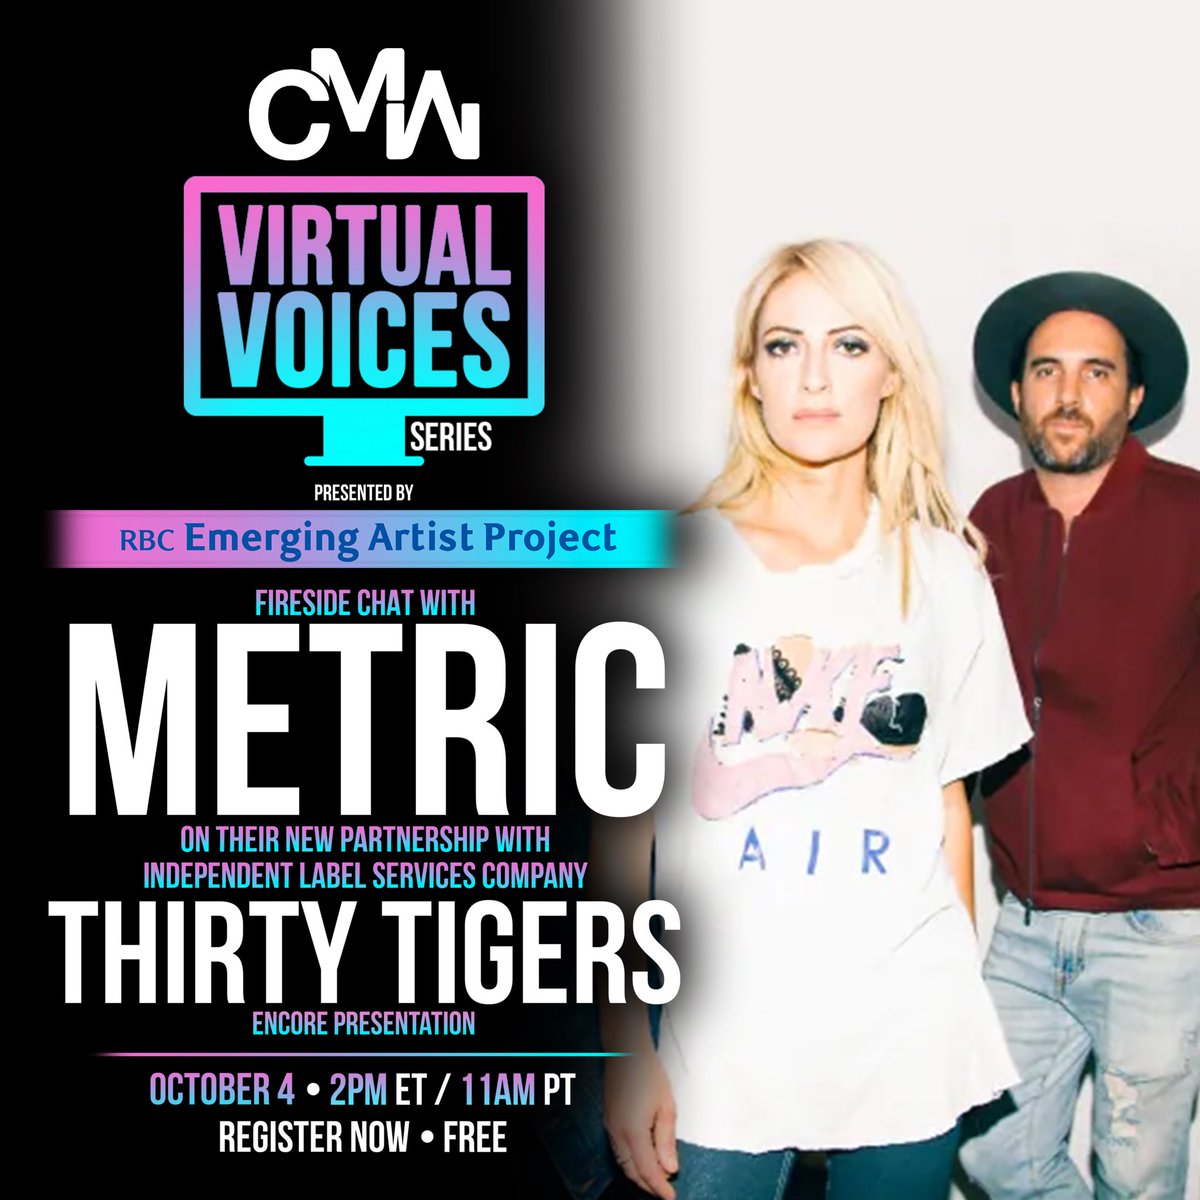 Virtual Voices is back! Tune in next Tuesday October 4th at 2pm ET to watch Metric’s Fireside Chat from CMW 2022 discussing their new partnership with independent label services company Thirty Tigers. Register now for FREE -> bit.ly/3SqWwVN